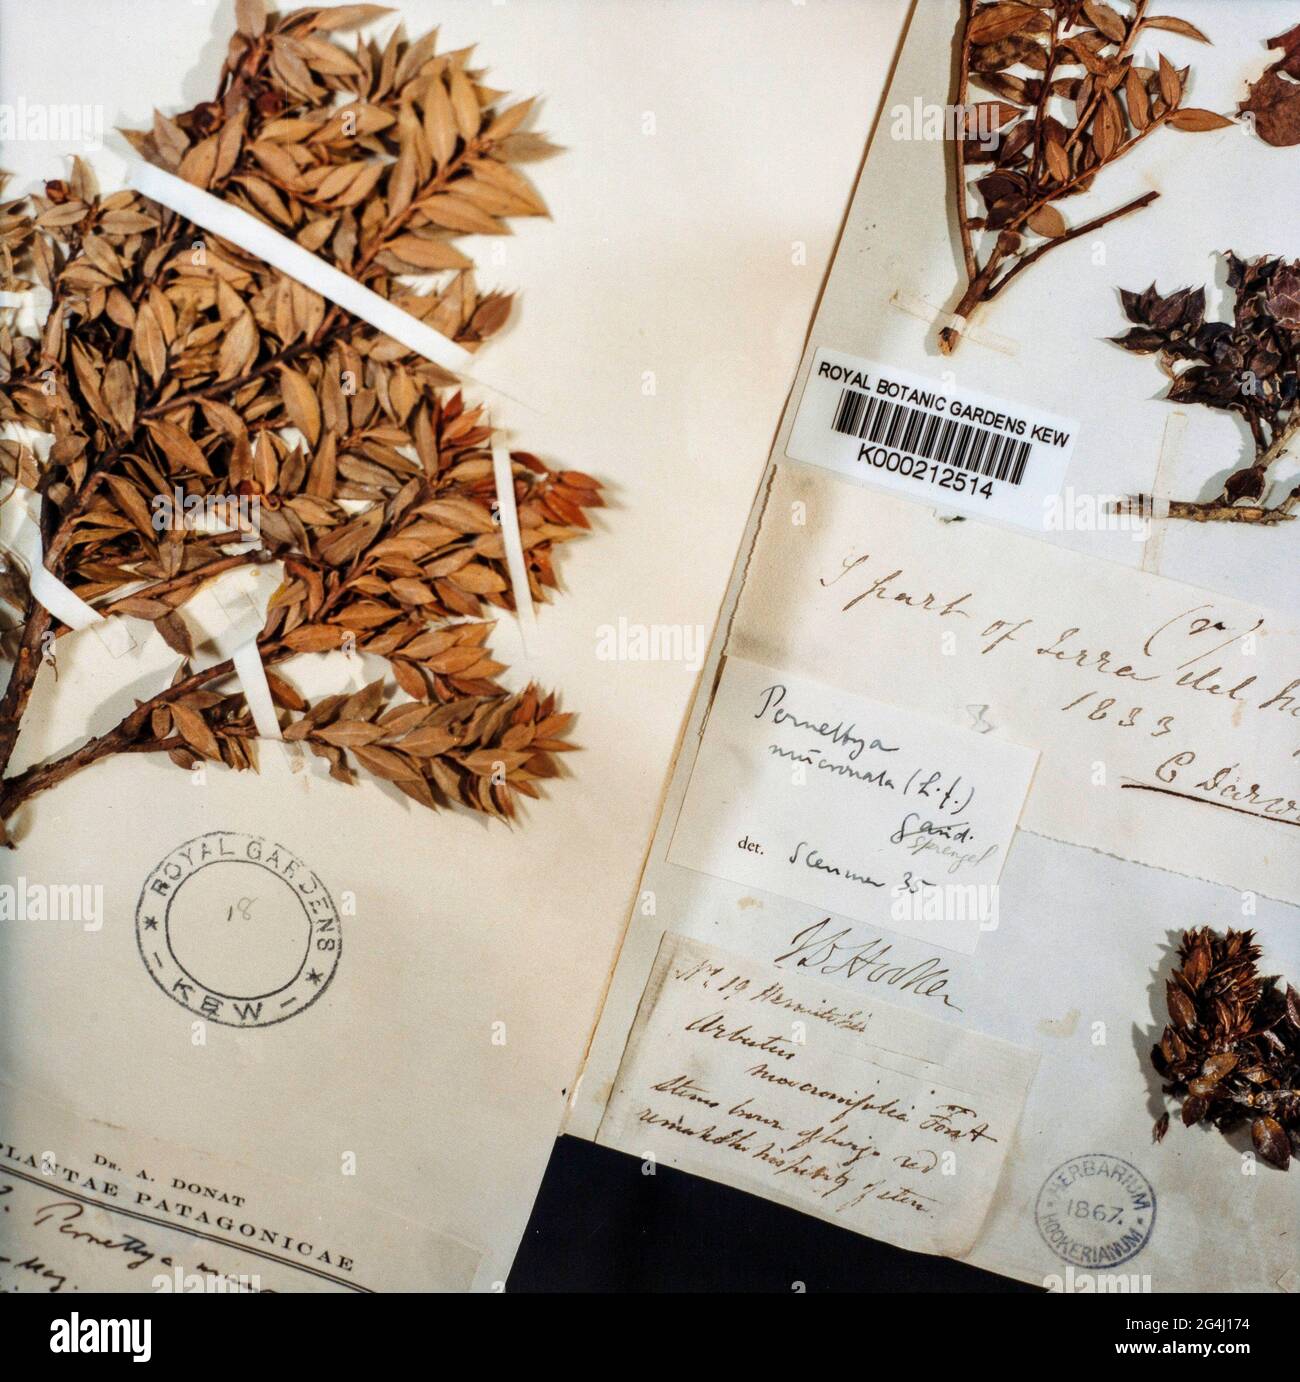 Herbarium sheet pressed and dried specimens from Patagonia collected by Charles Darwin at Royal Botanic Gardens, Kew, London, England Stock Photo